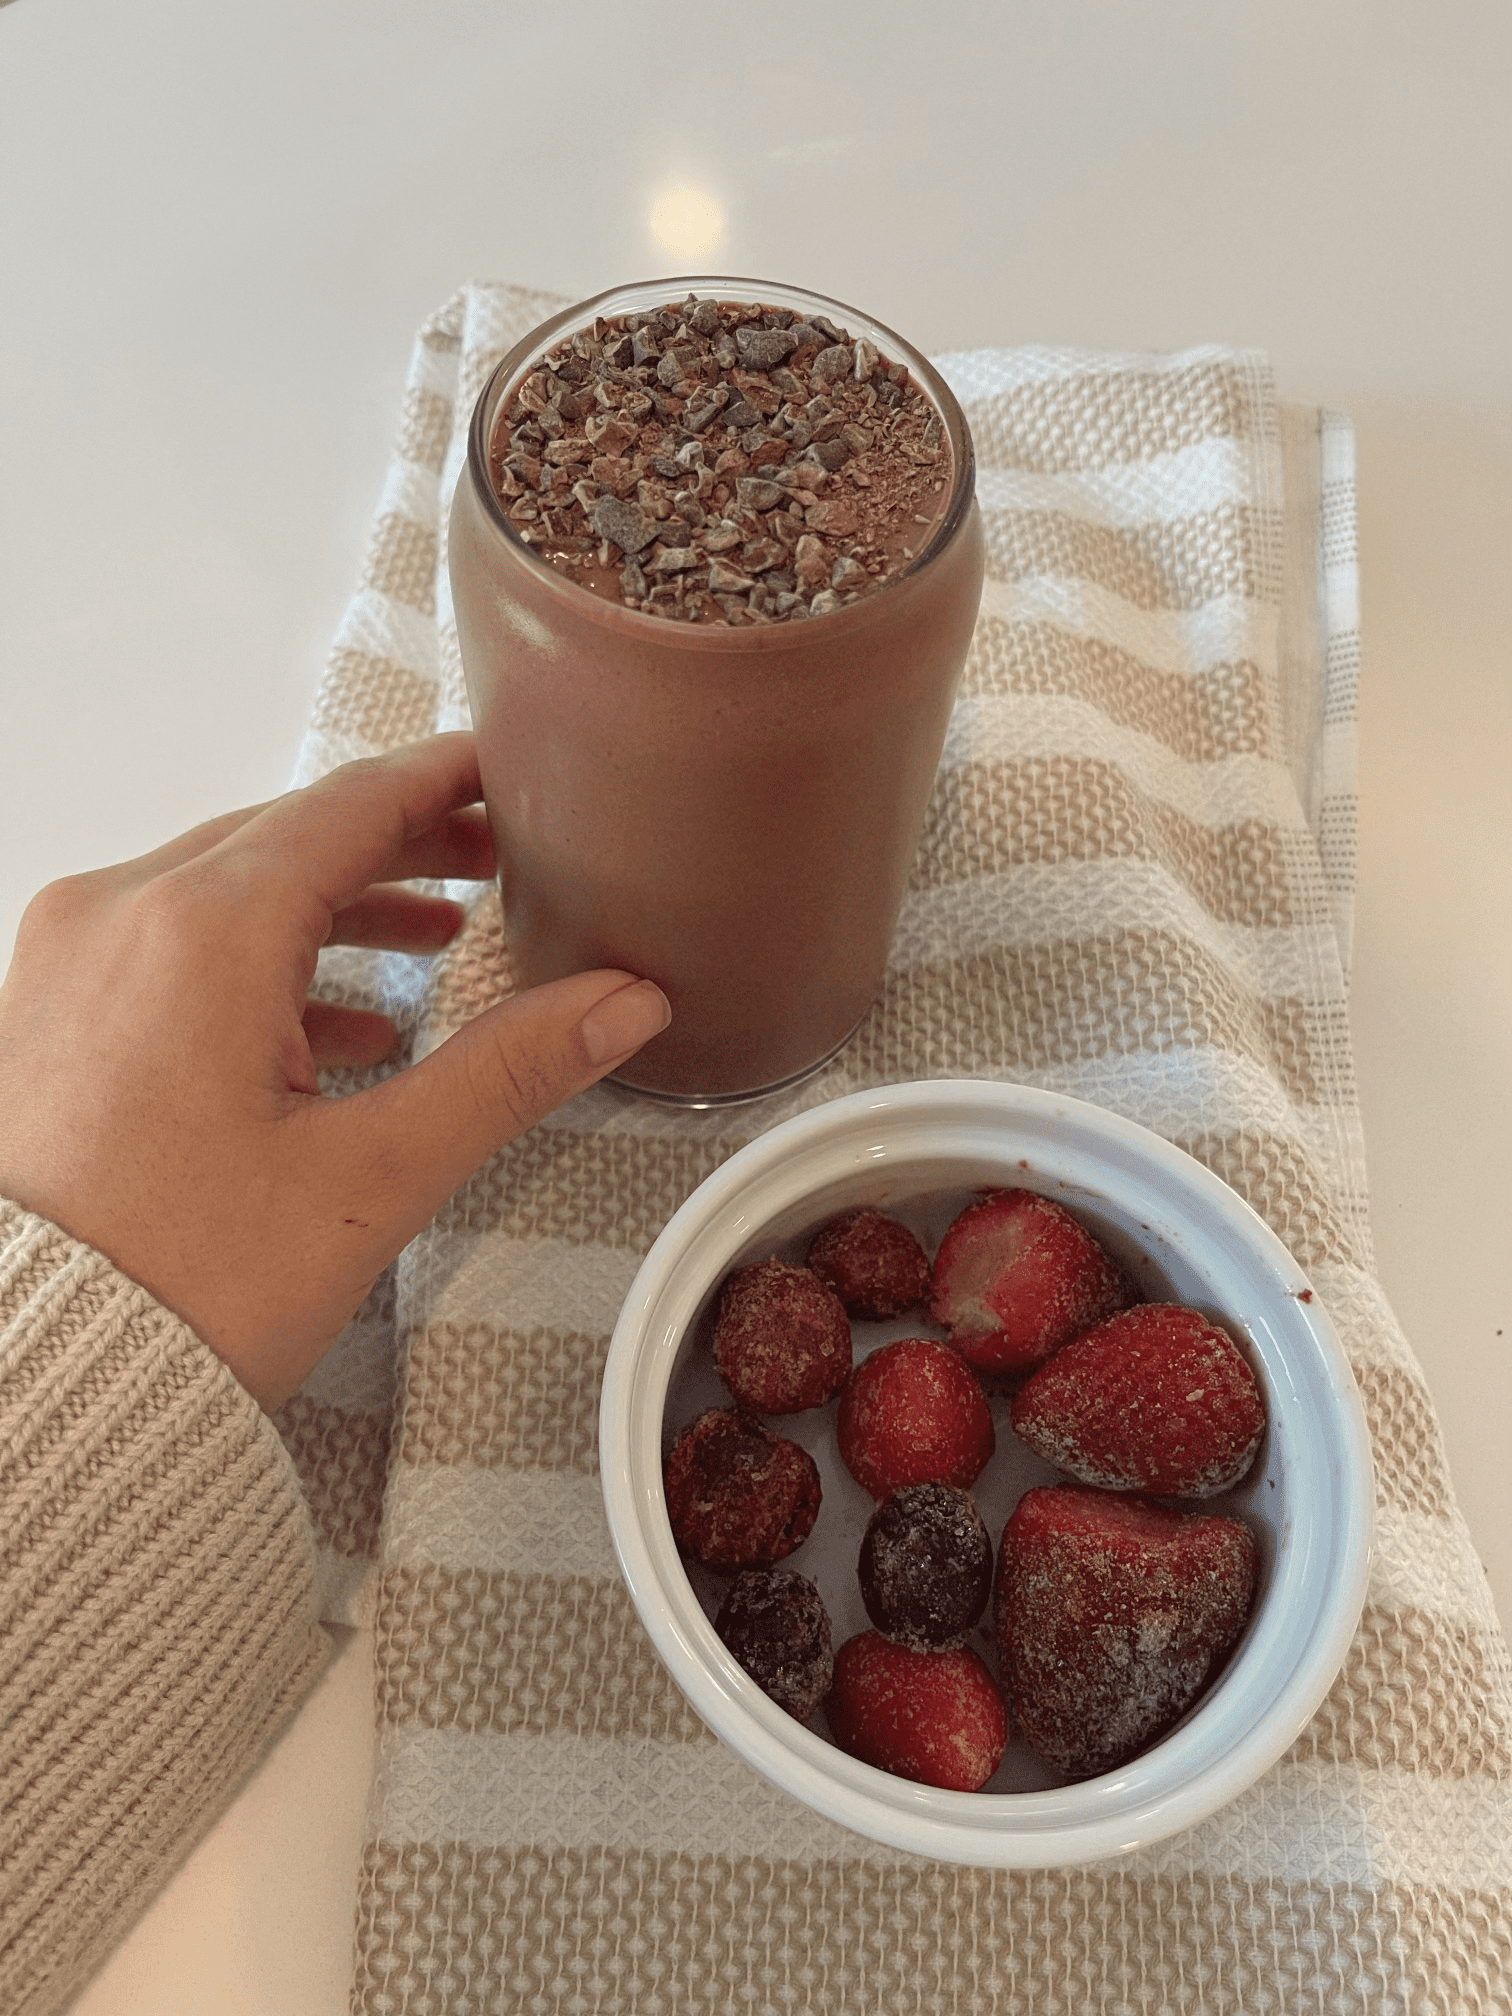 How to Make a High Protein Chocolate Covered Cherry Smoothie